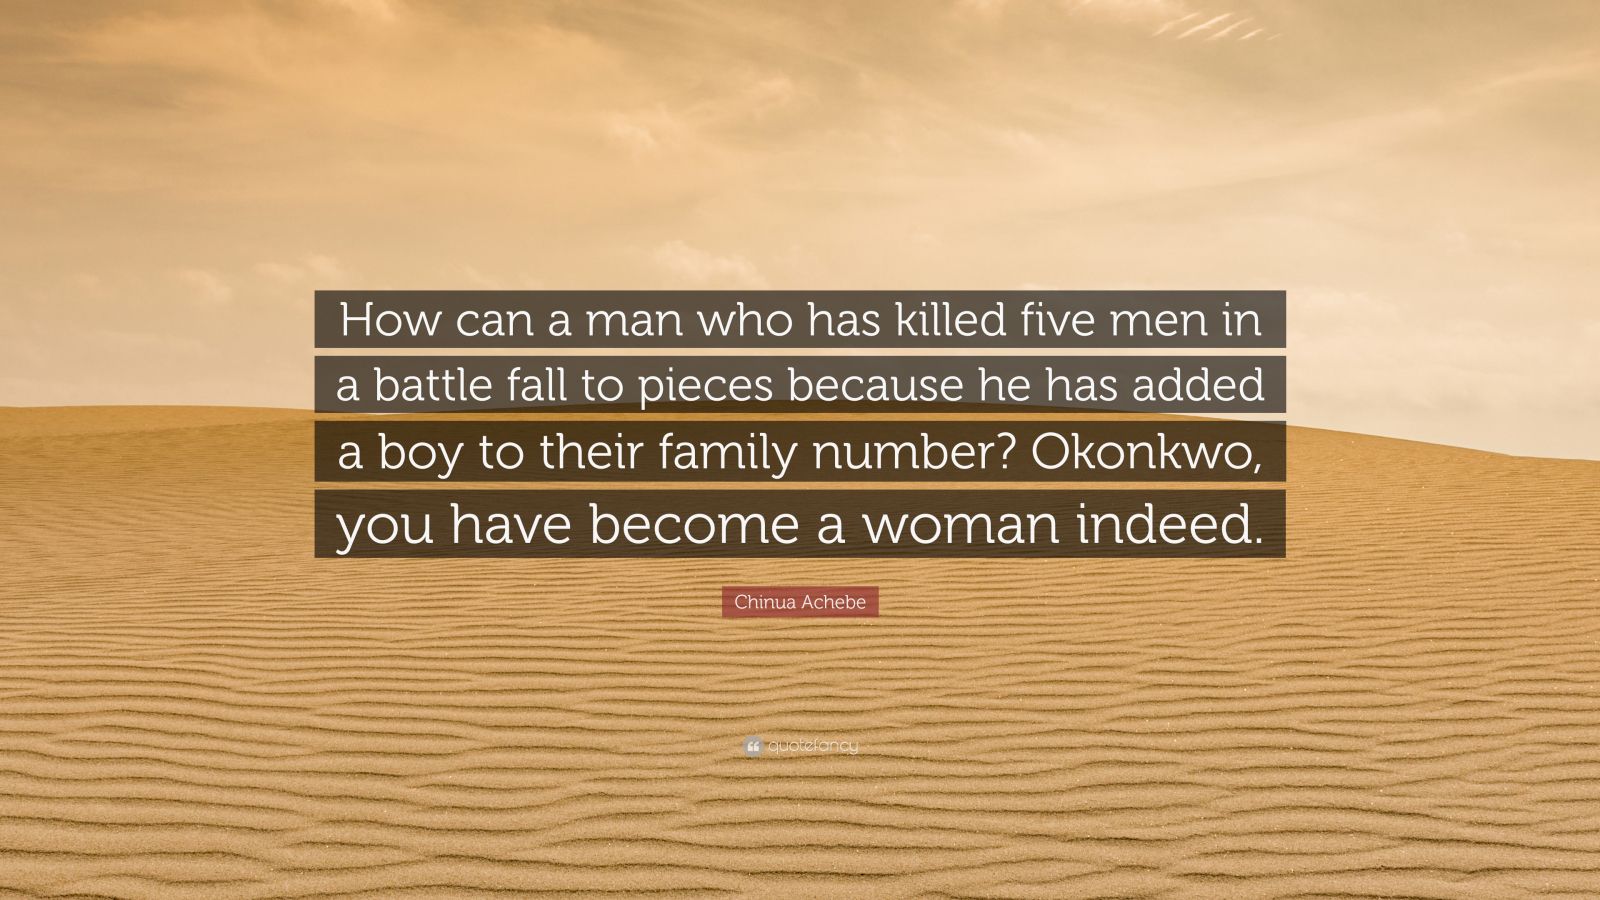 Chinua Achebe Quote: “How can a man who has killed five men in a battle ...